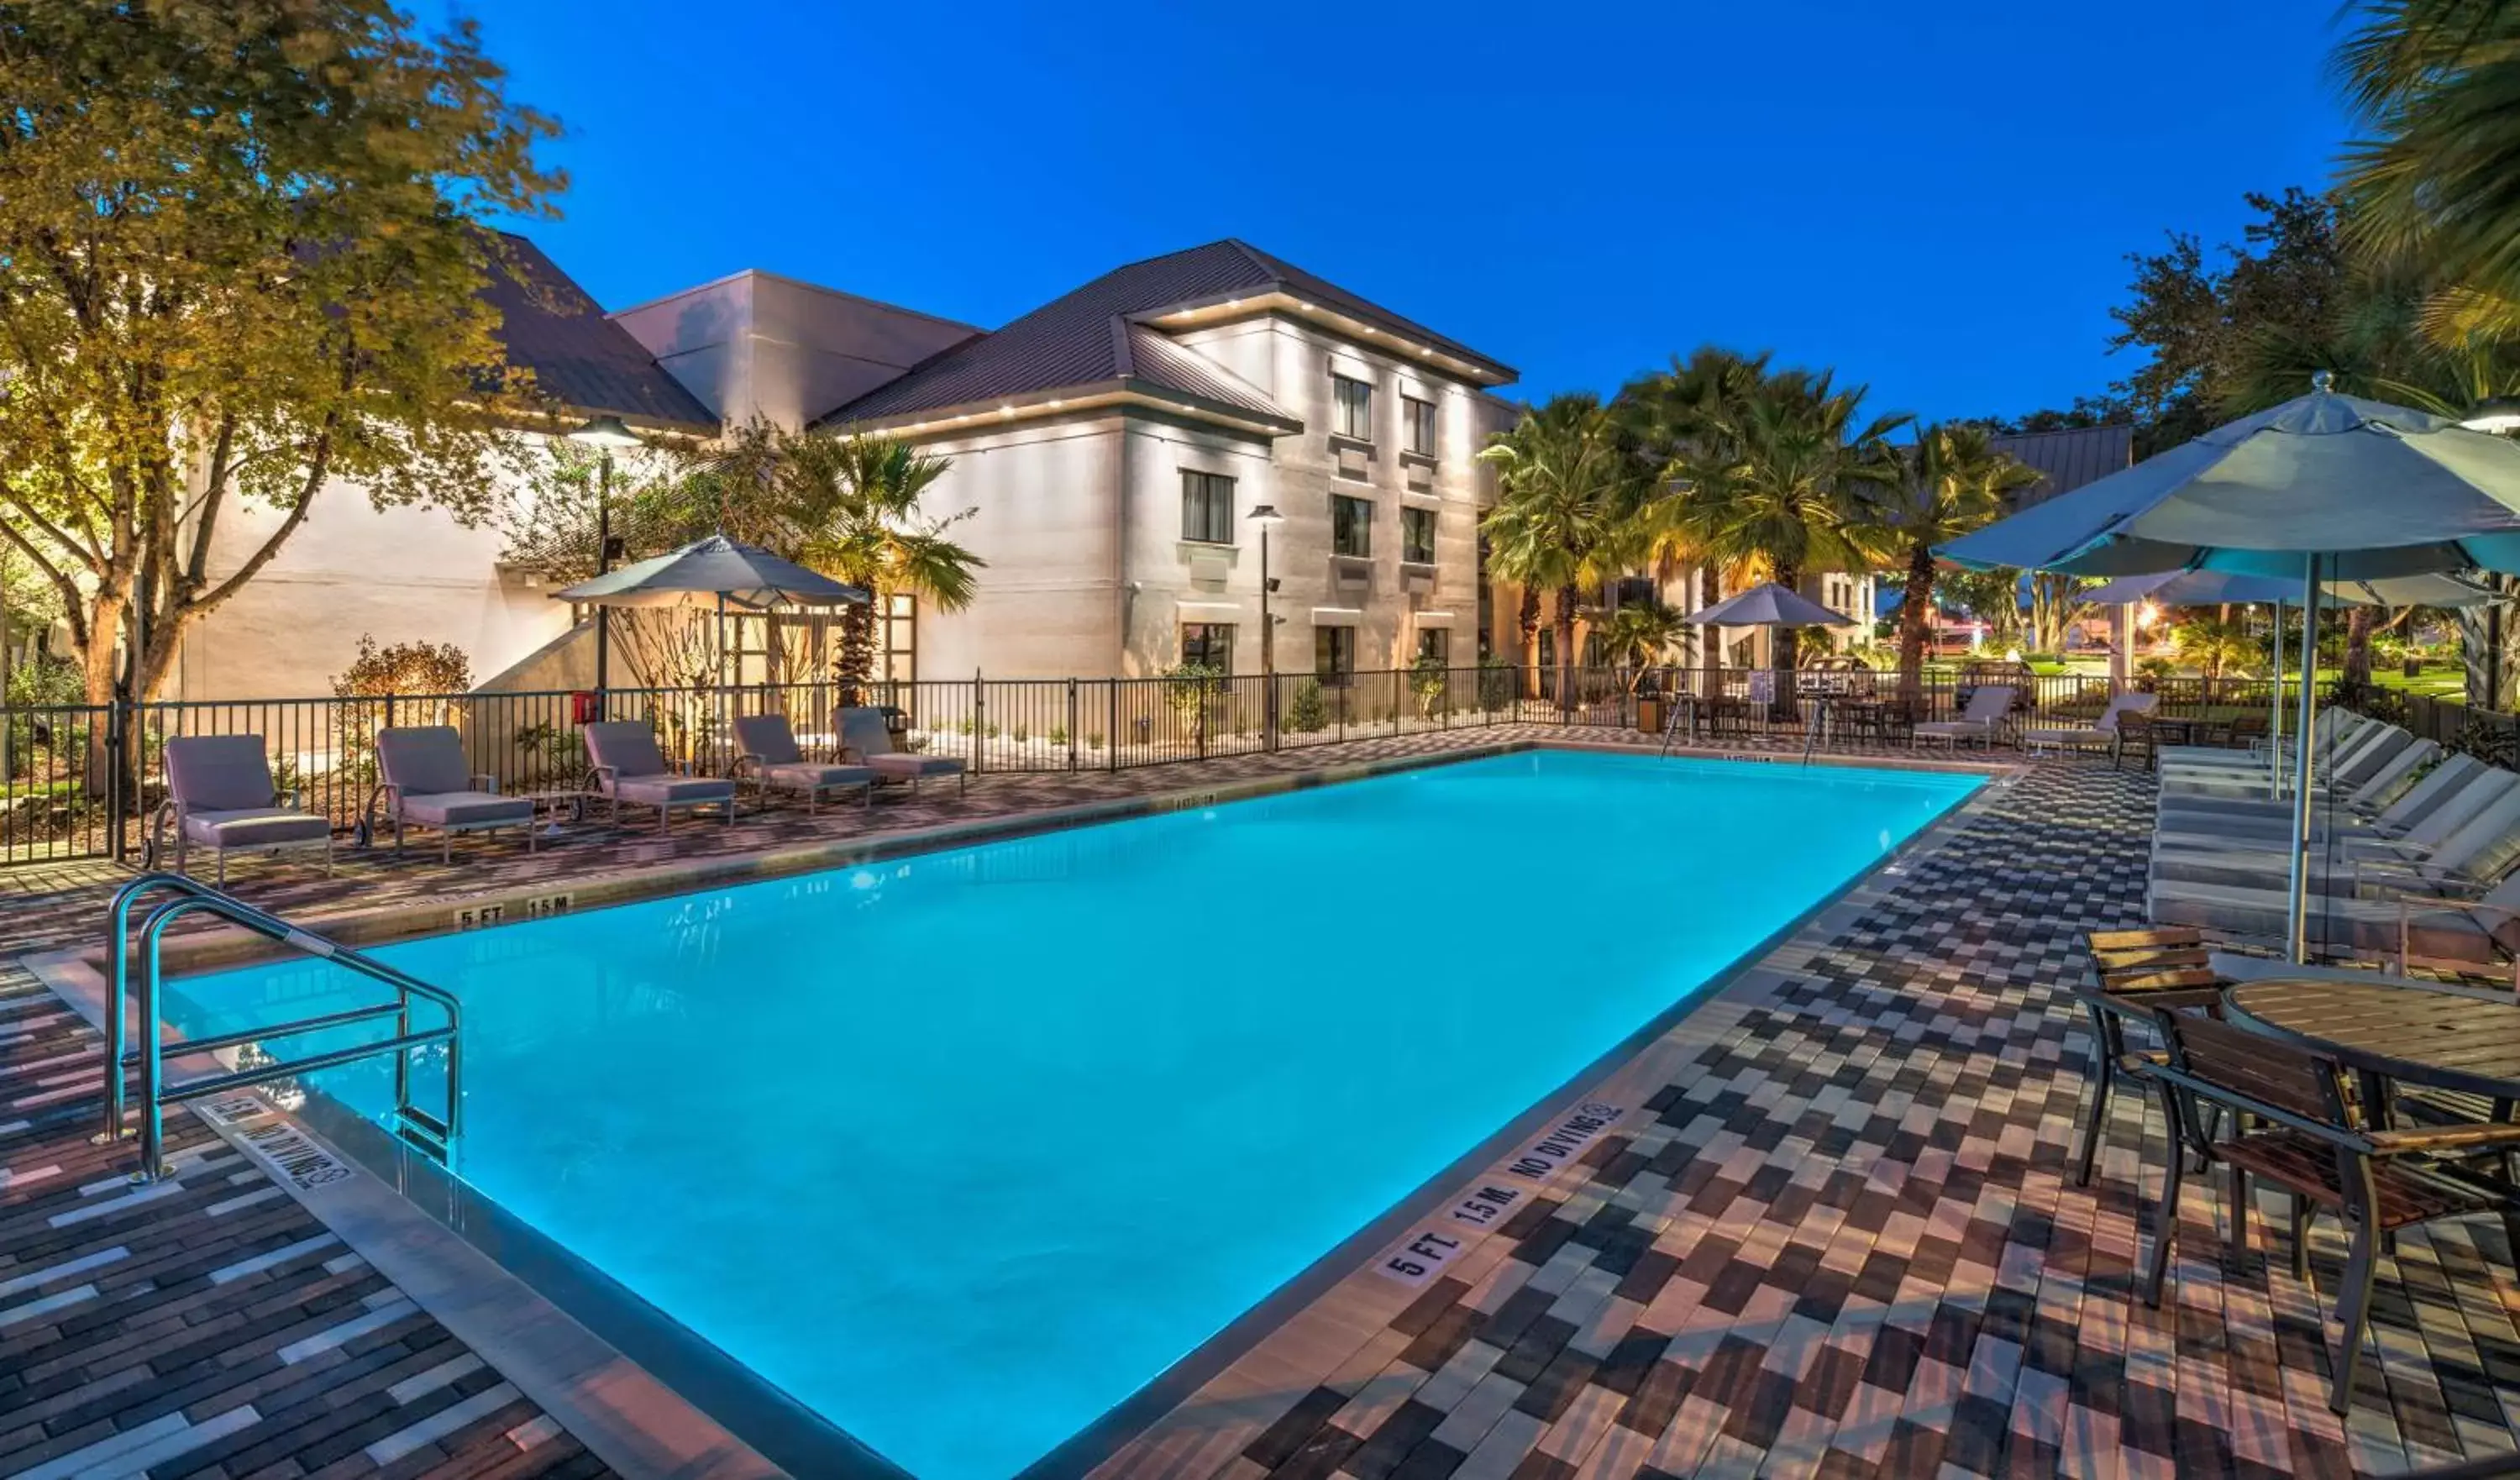 Pool view, Property Building in DoubleTree by Hilton Gainesville